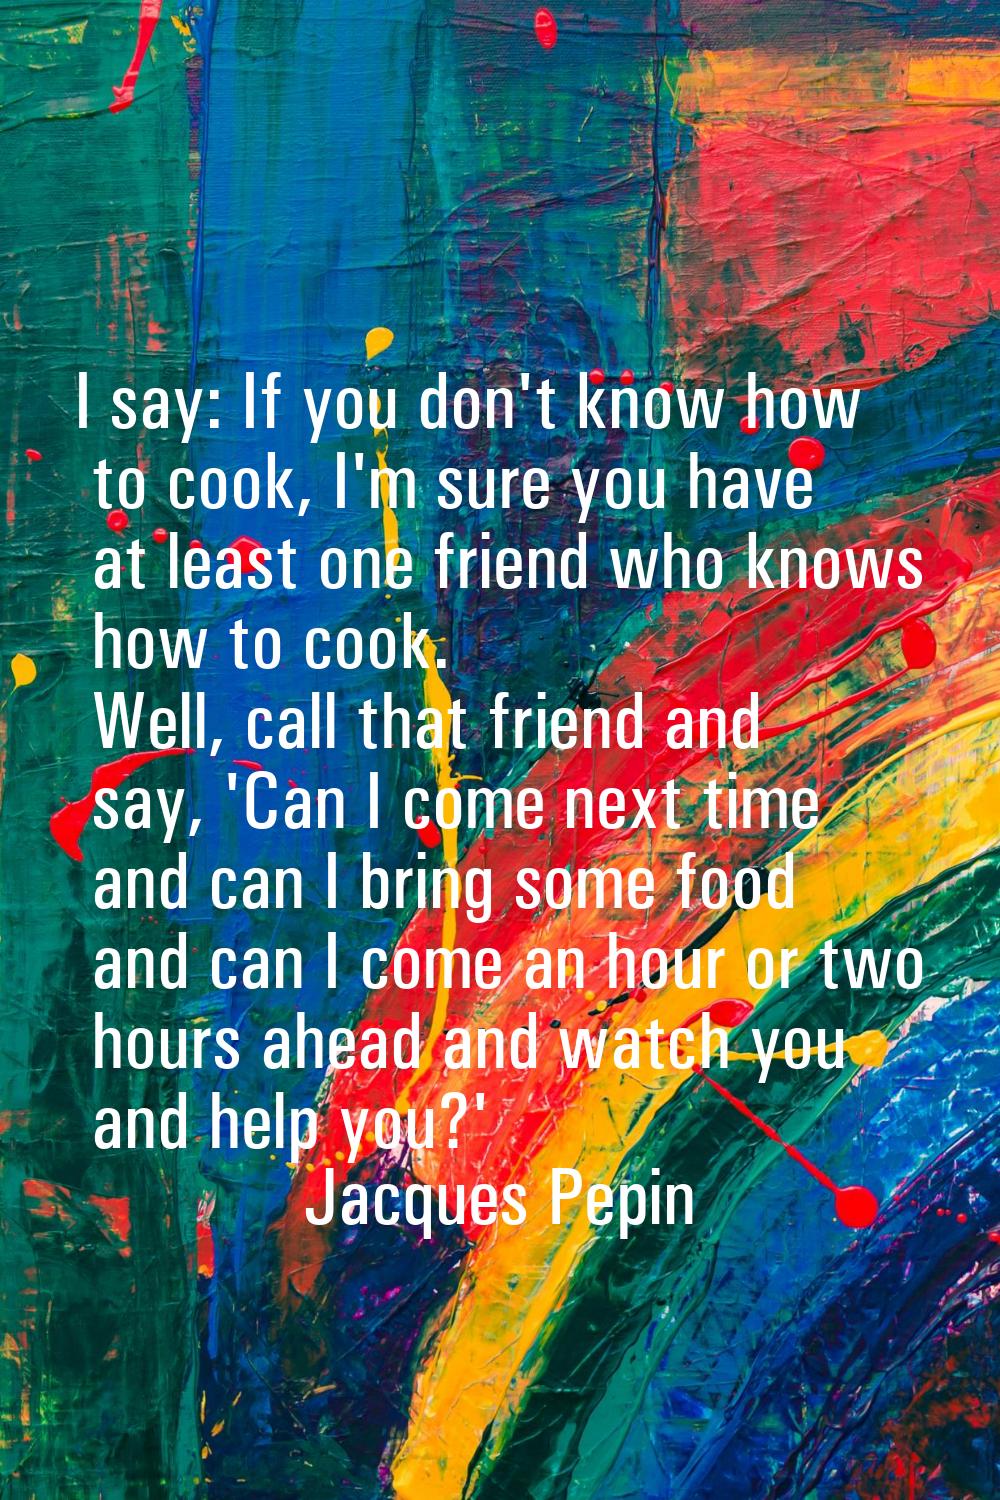 I say: If you don't know how to cook, I'm sure you have at least one friend who knows how to cook. 